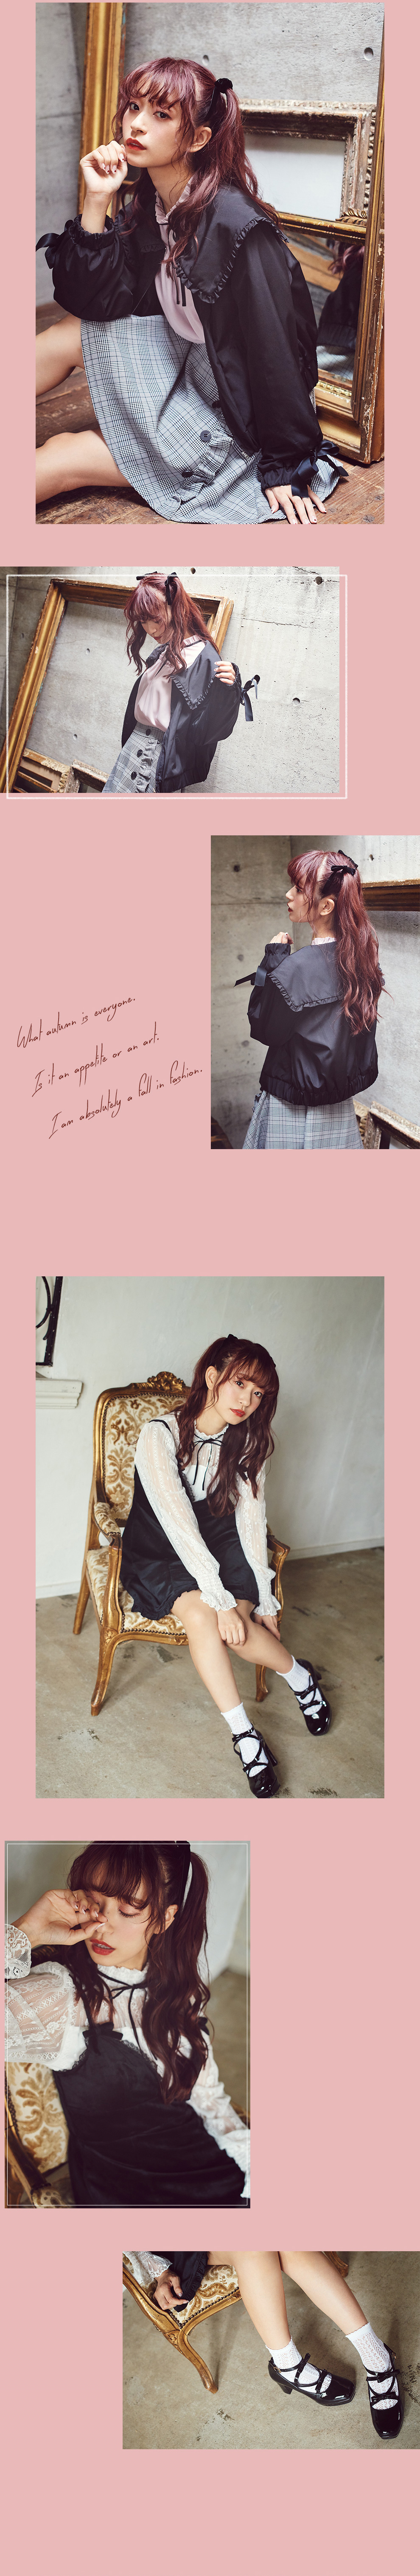 2019 AW Girly Collection Vol.2 『My favorite things』